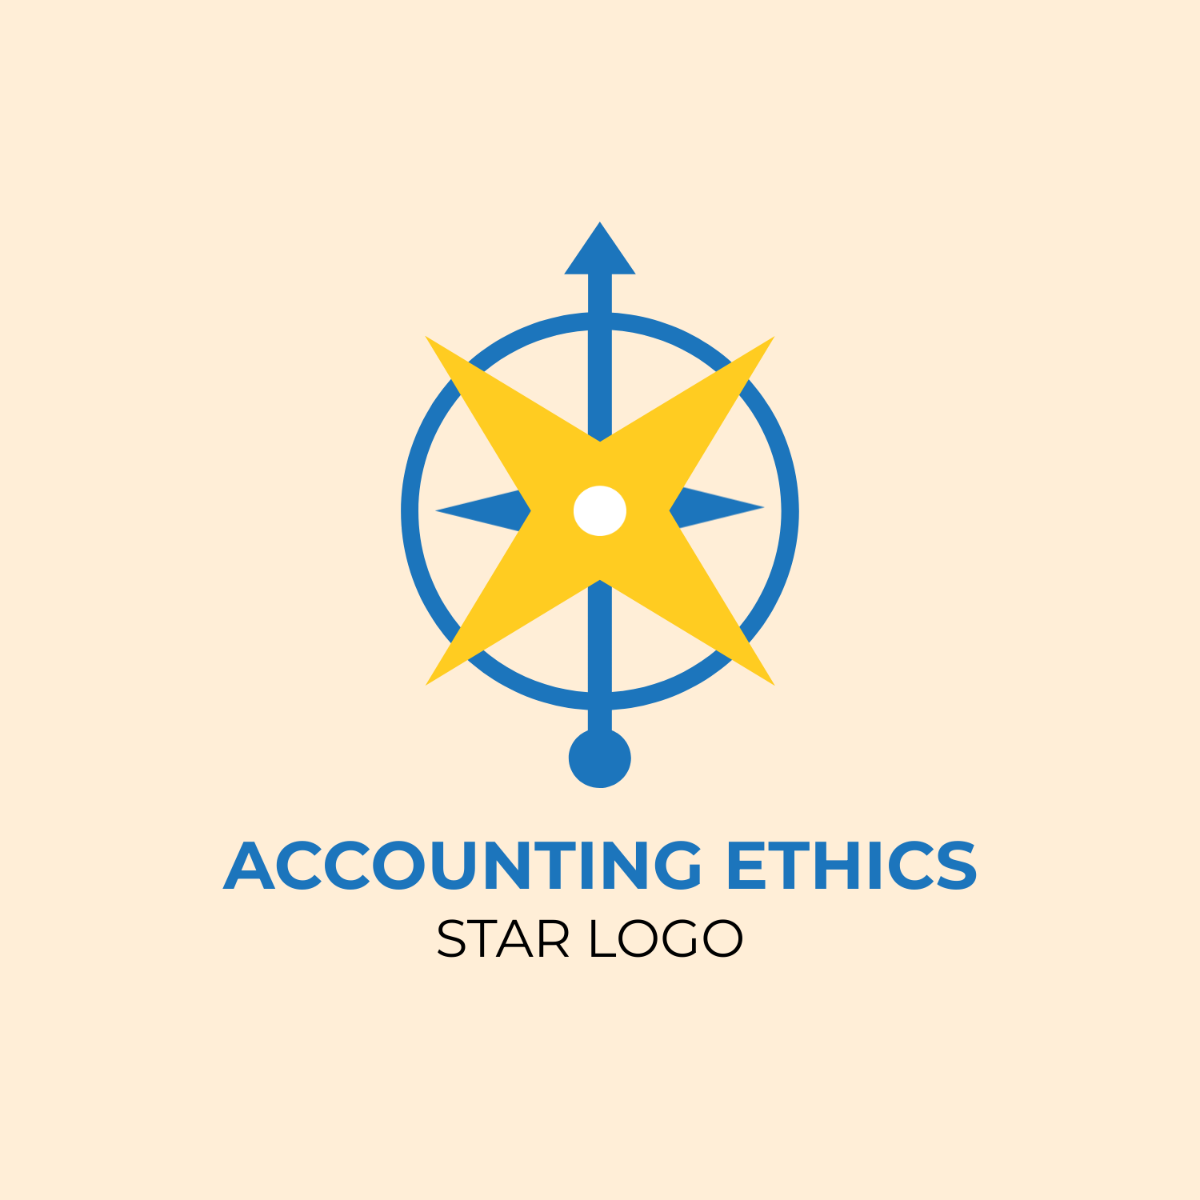 Accounting Ethics Star Logo Template